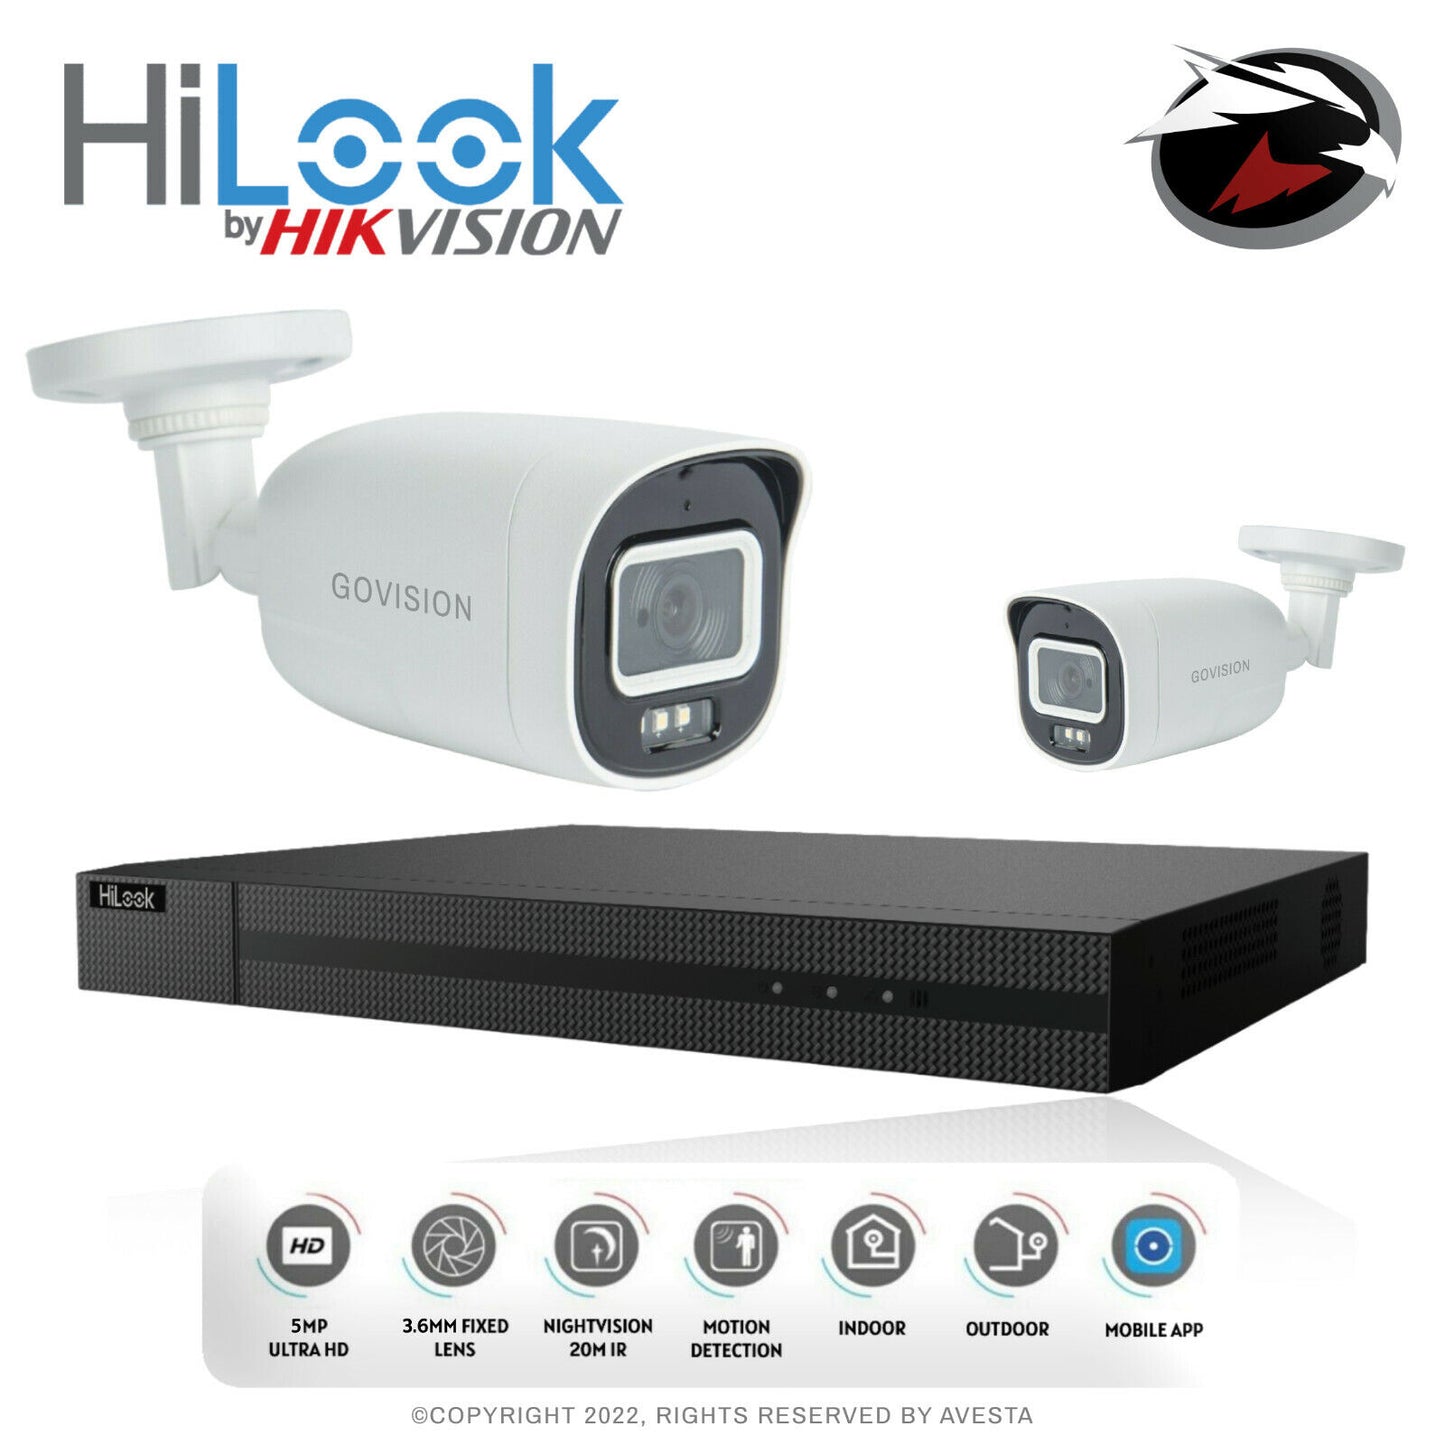 HIKVISION HILOOK 5MP CCTV SYSTEM DVR UHD 24/7 HOURS COLORFUL NIGHTVISION CAMERA 4CH DVR 2xCameras (white) 2TB HDD